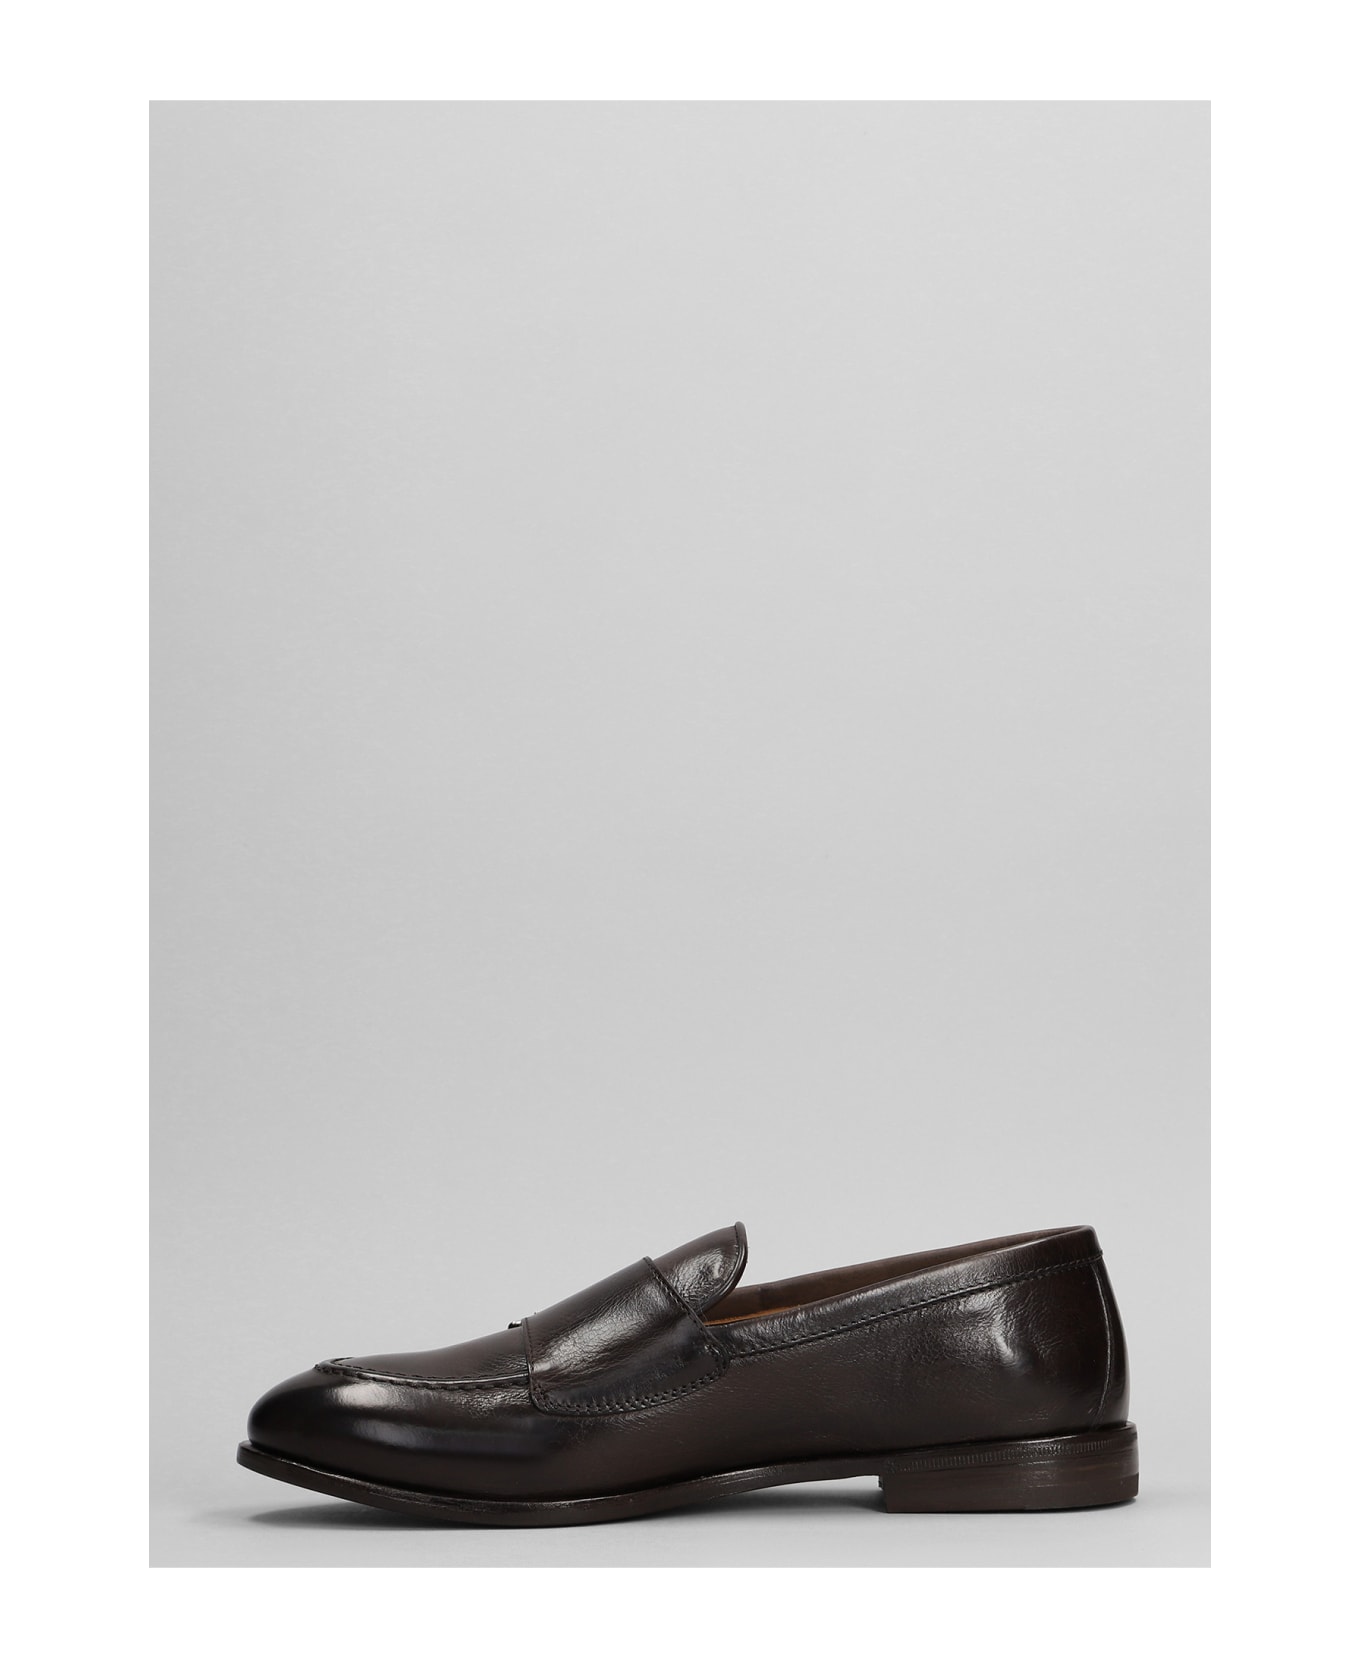 Henderson Baracco Loafers In Brown Leather - brown